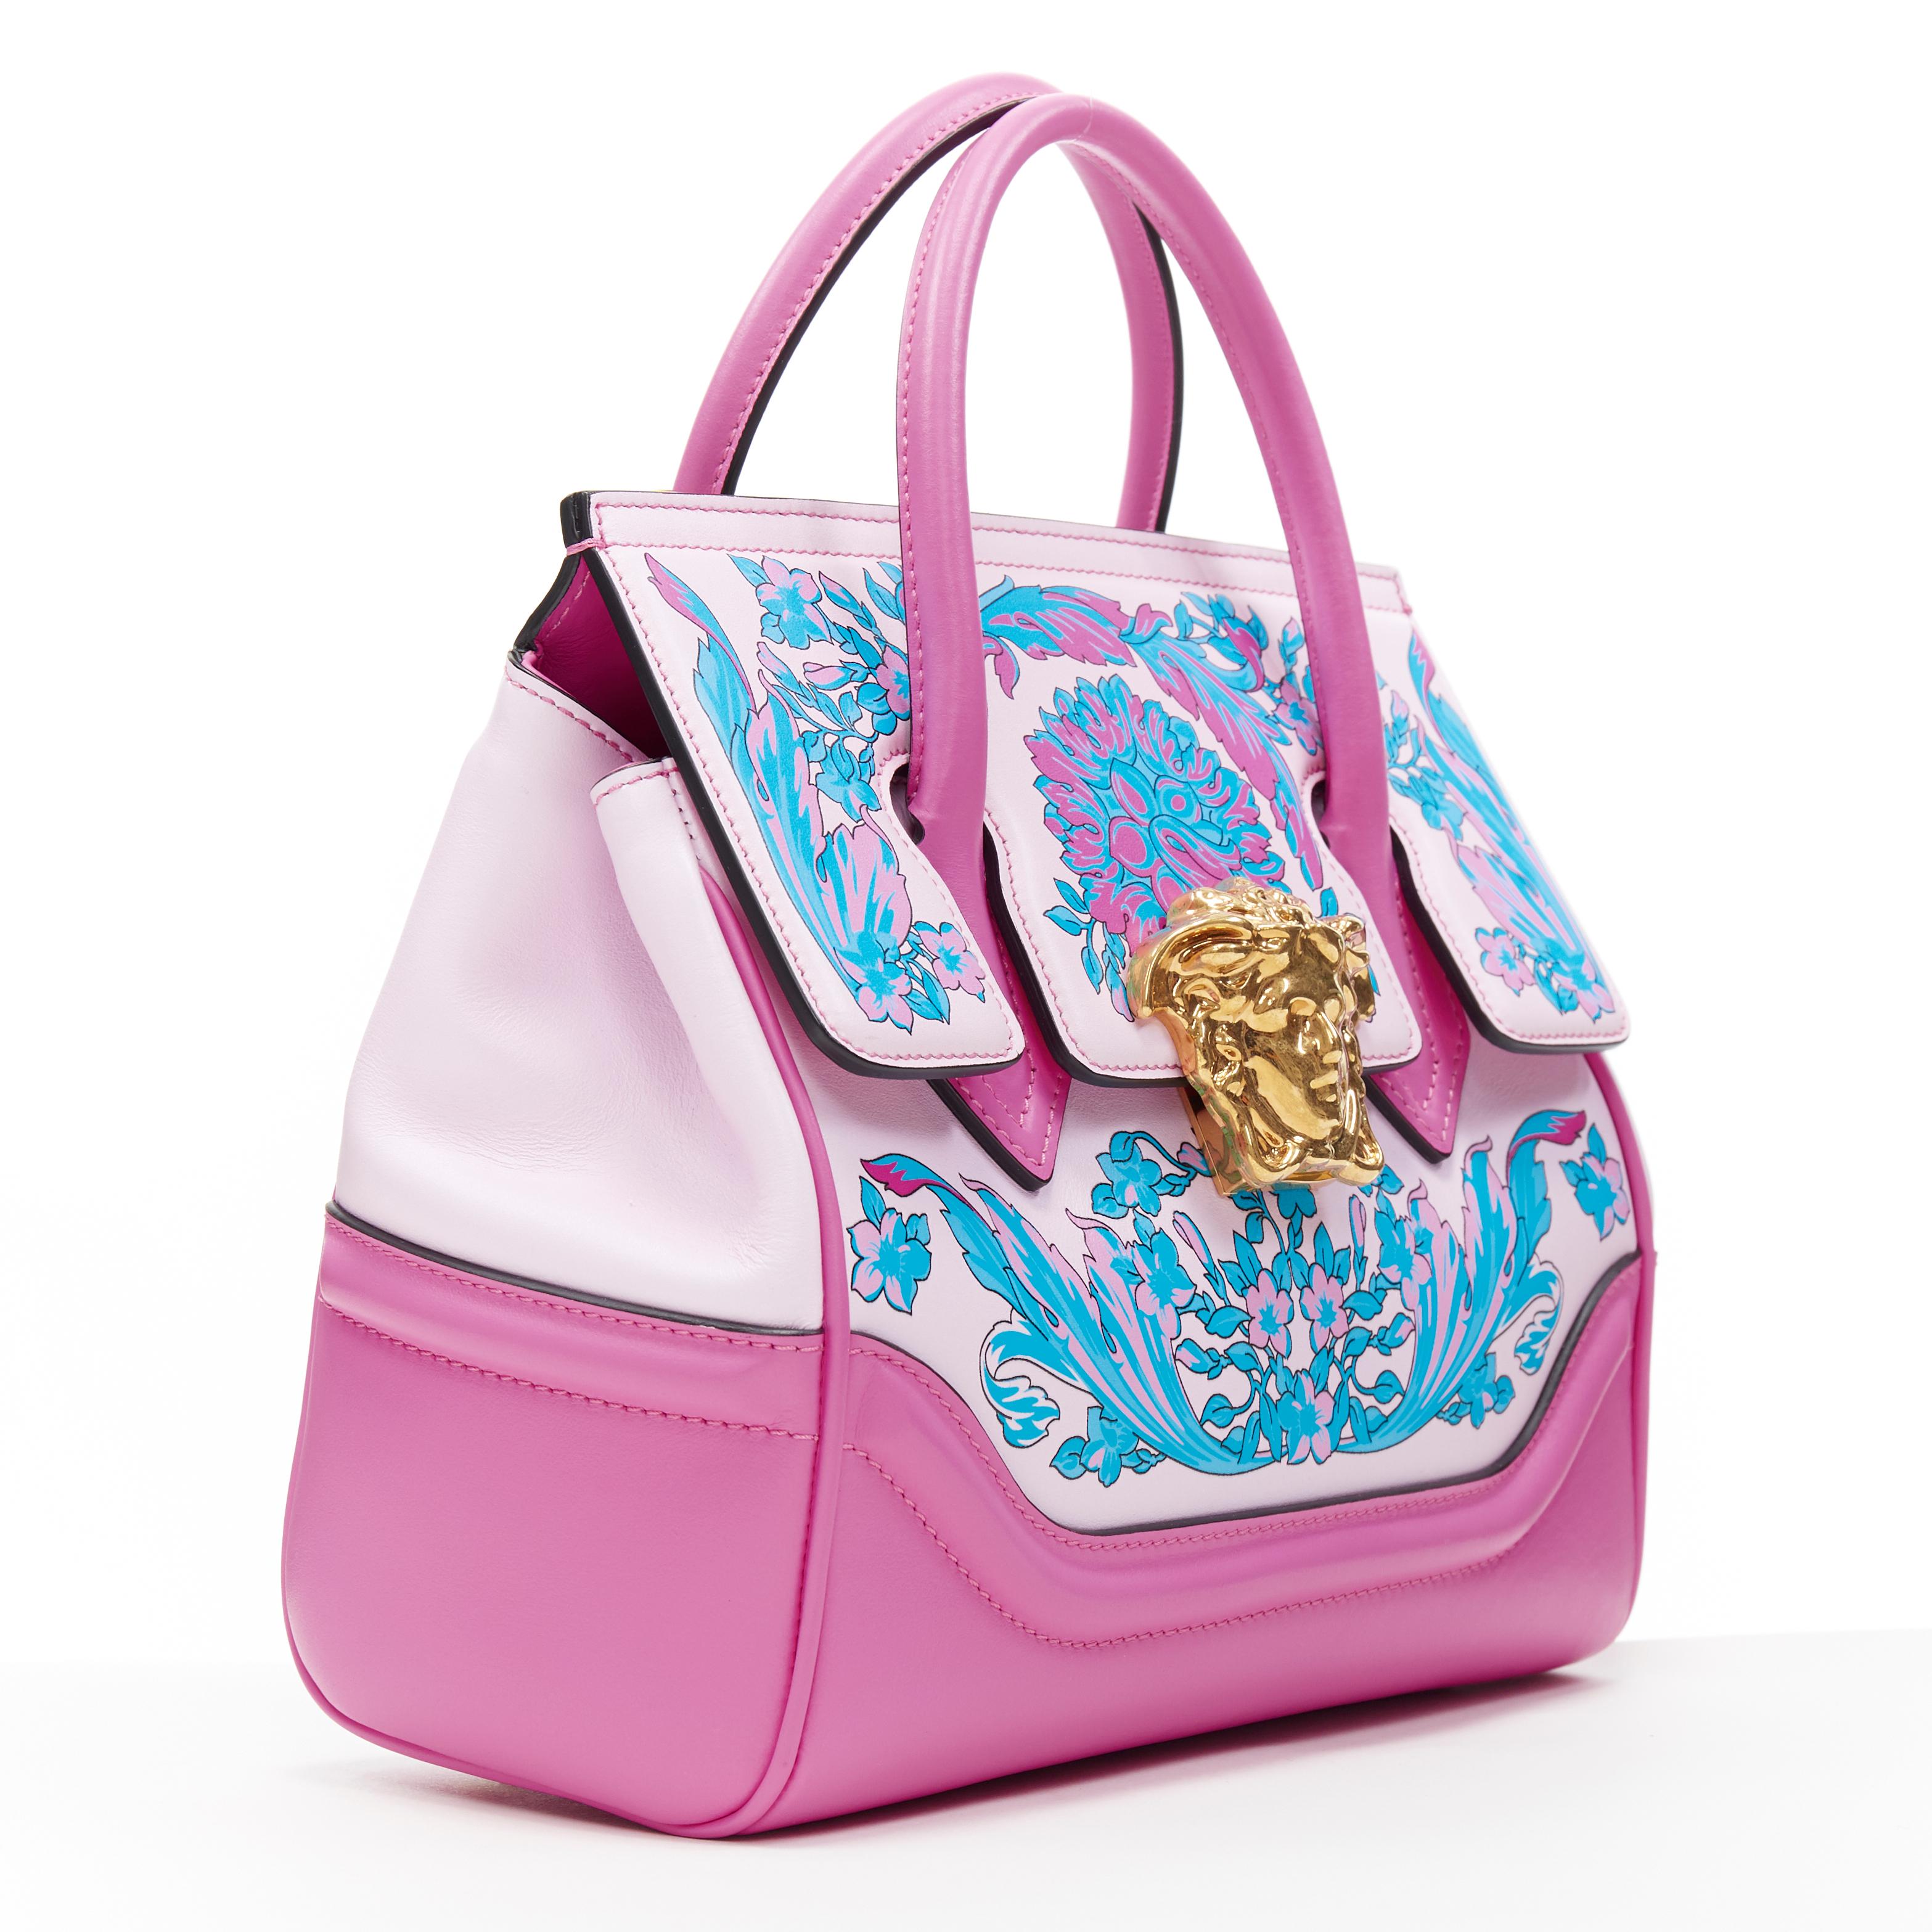 new VERSACE Palazzo Empire Small Technicolor Baroque pink Medusa tote bag 
Brand: Versace
Designer: Donatella Versace
Collection: 2019
Model Name / Style: Palazzo Empire
Material: Leather
Color: Pink
Pattern: Floral
Closure: Clasp
Lining material: